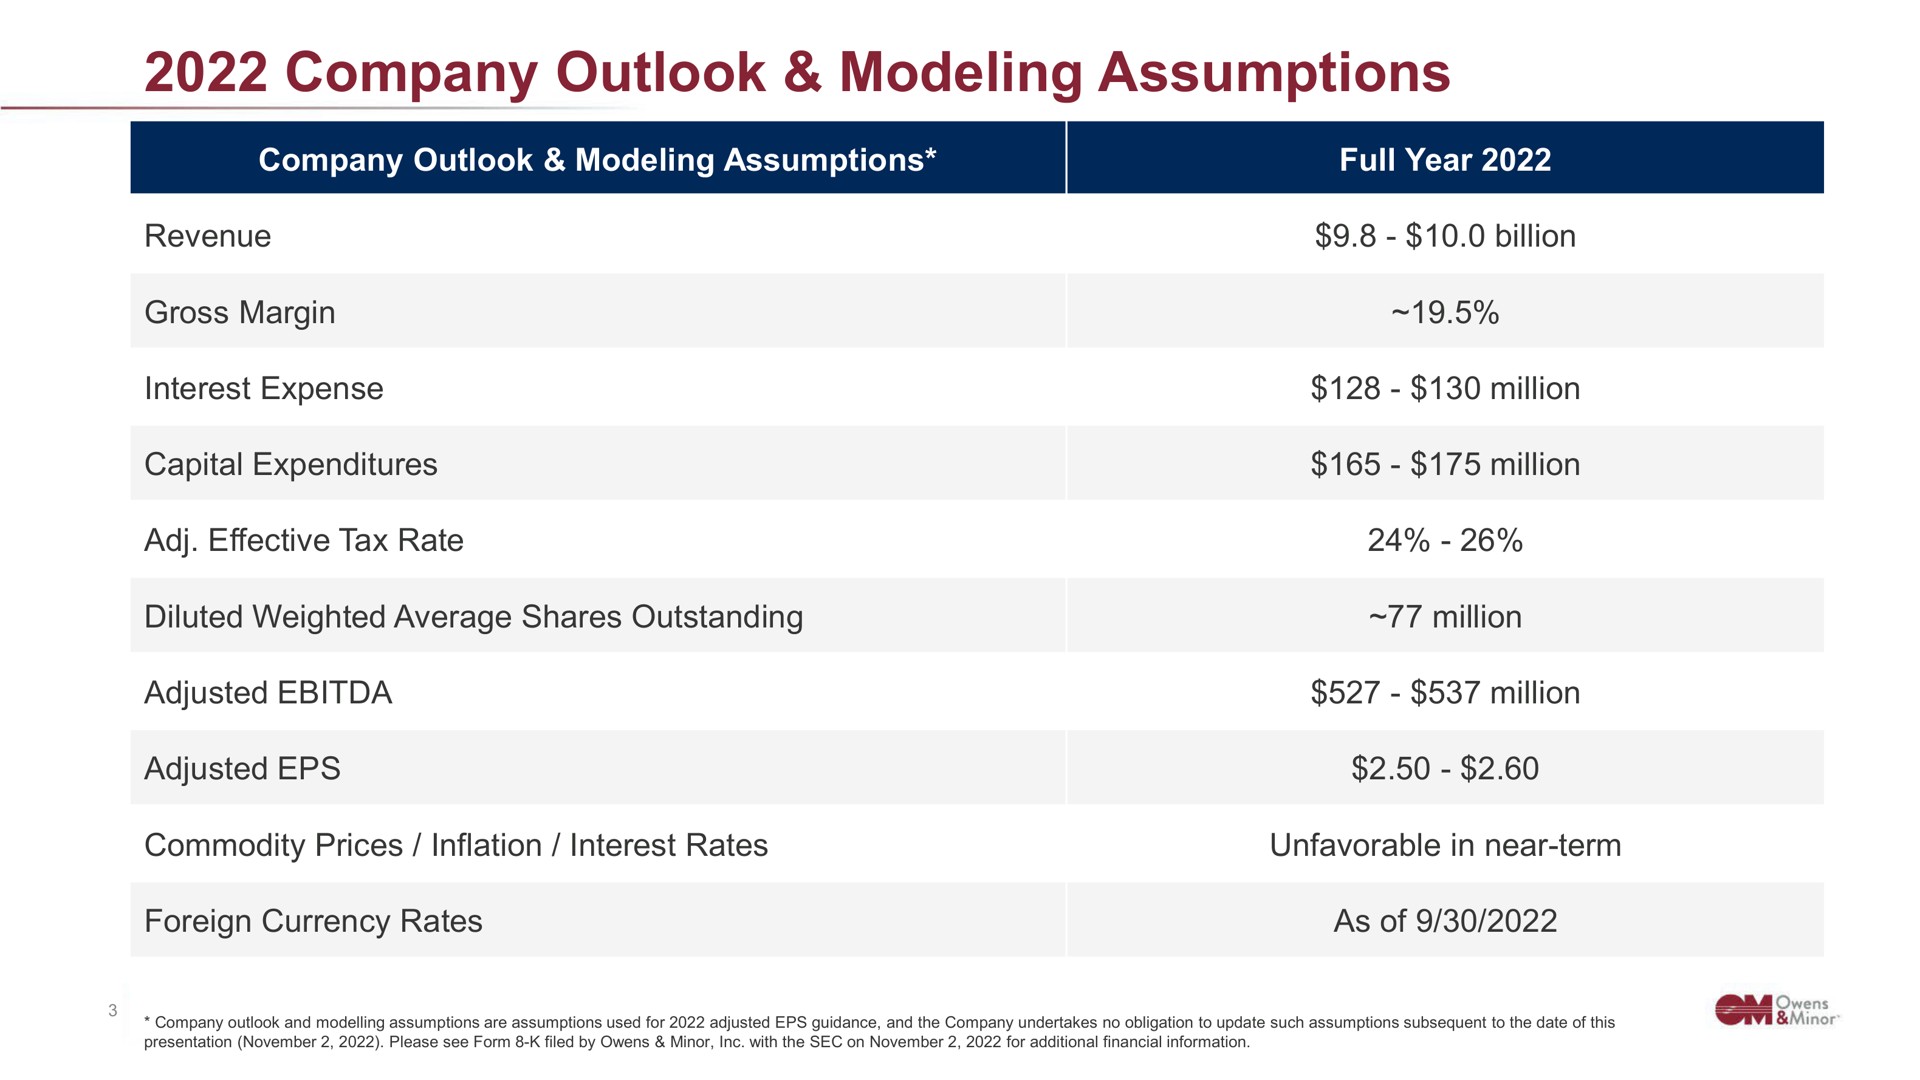 company outlook modeling assumptions and assumption are used for adjusted and the undertakes no obligation to update such subsequent to the date | Owens&Minor